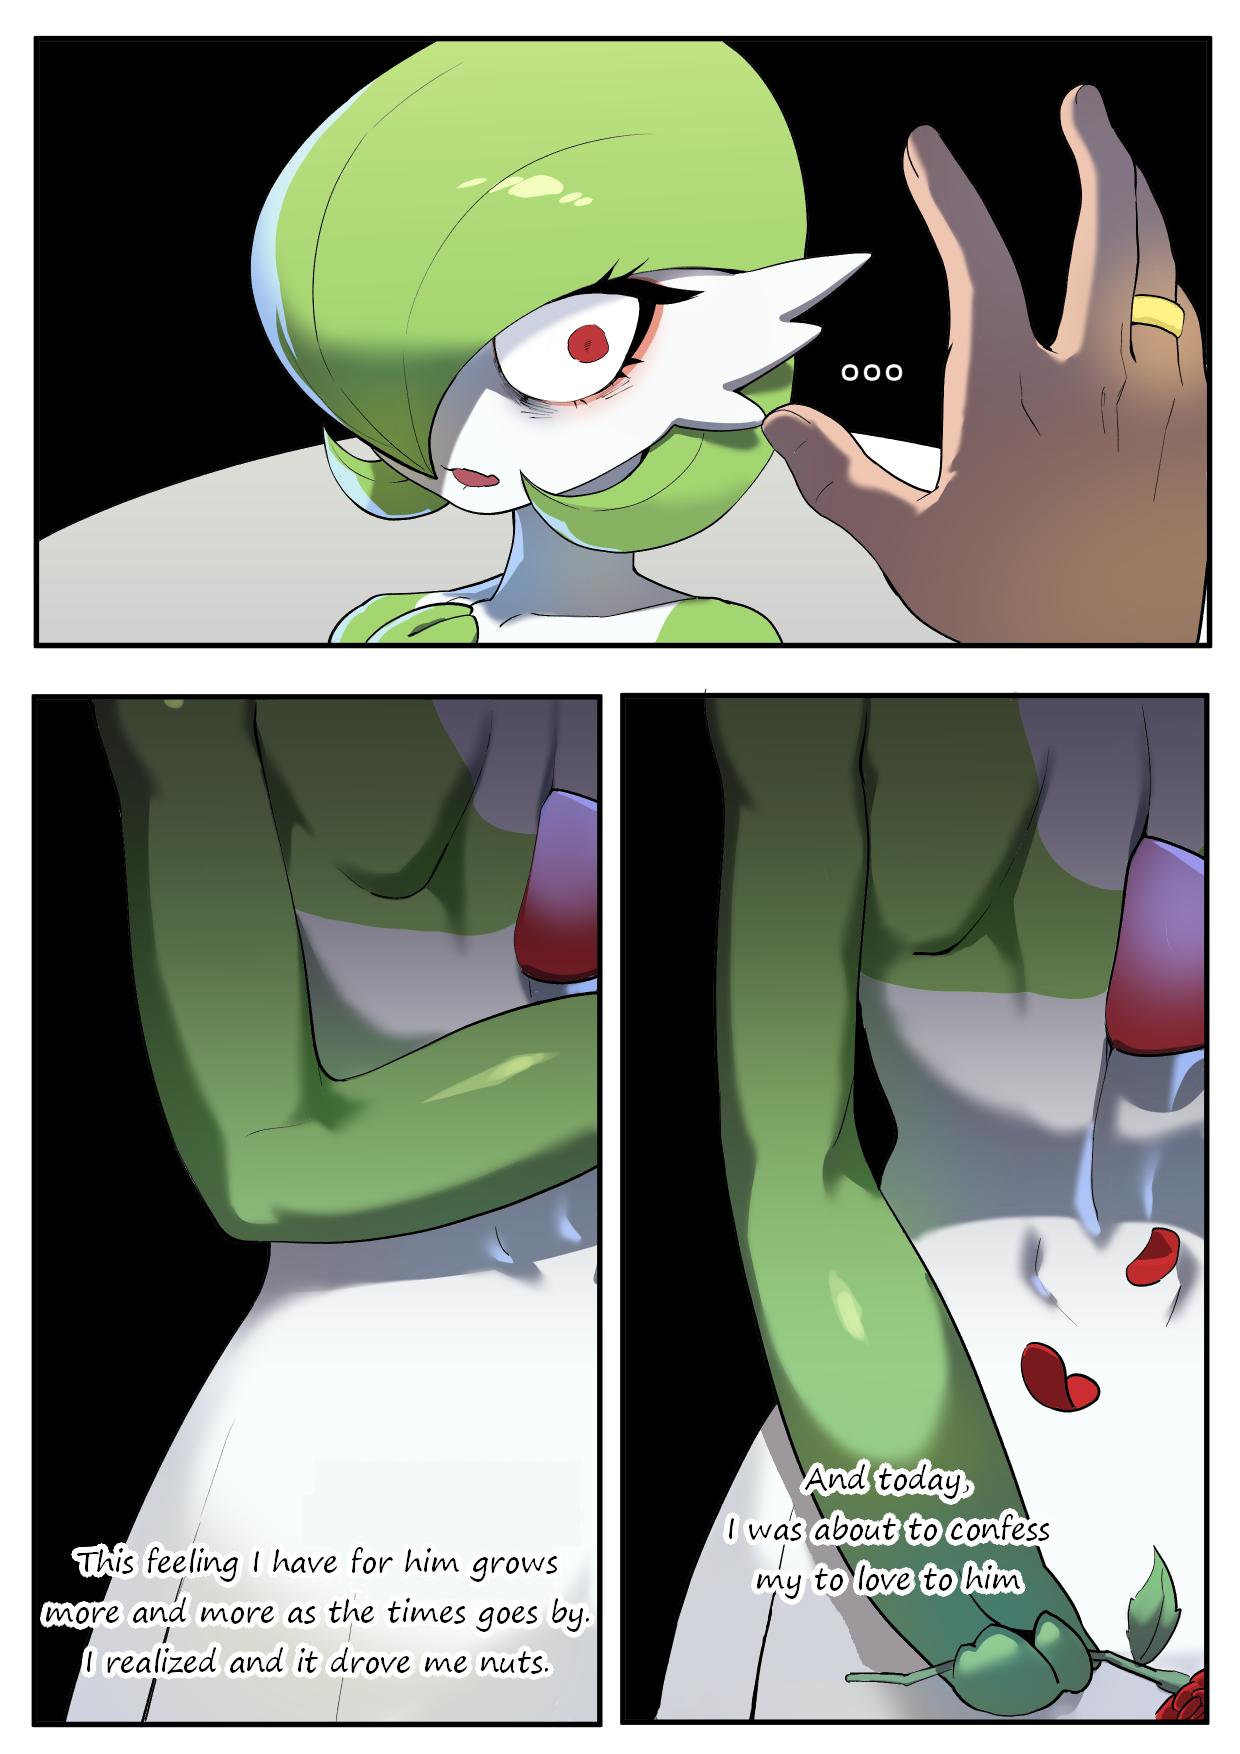 Best Blowjobs Ever The Gardevior that loved her trainer too much - Pokemon | pocket monsters Cumshot - Picture 3